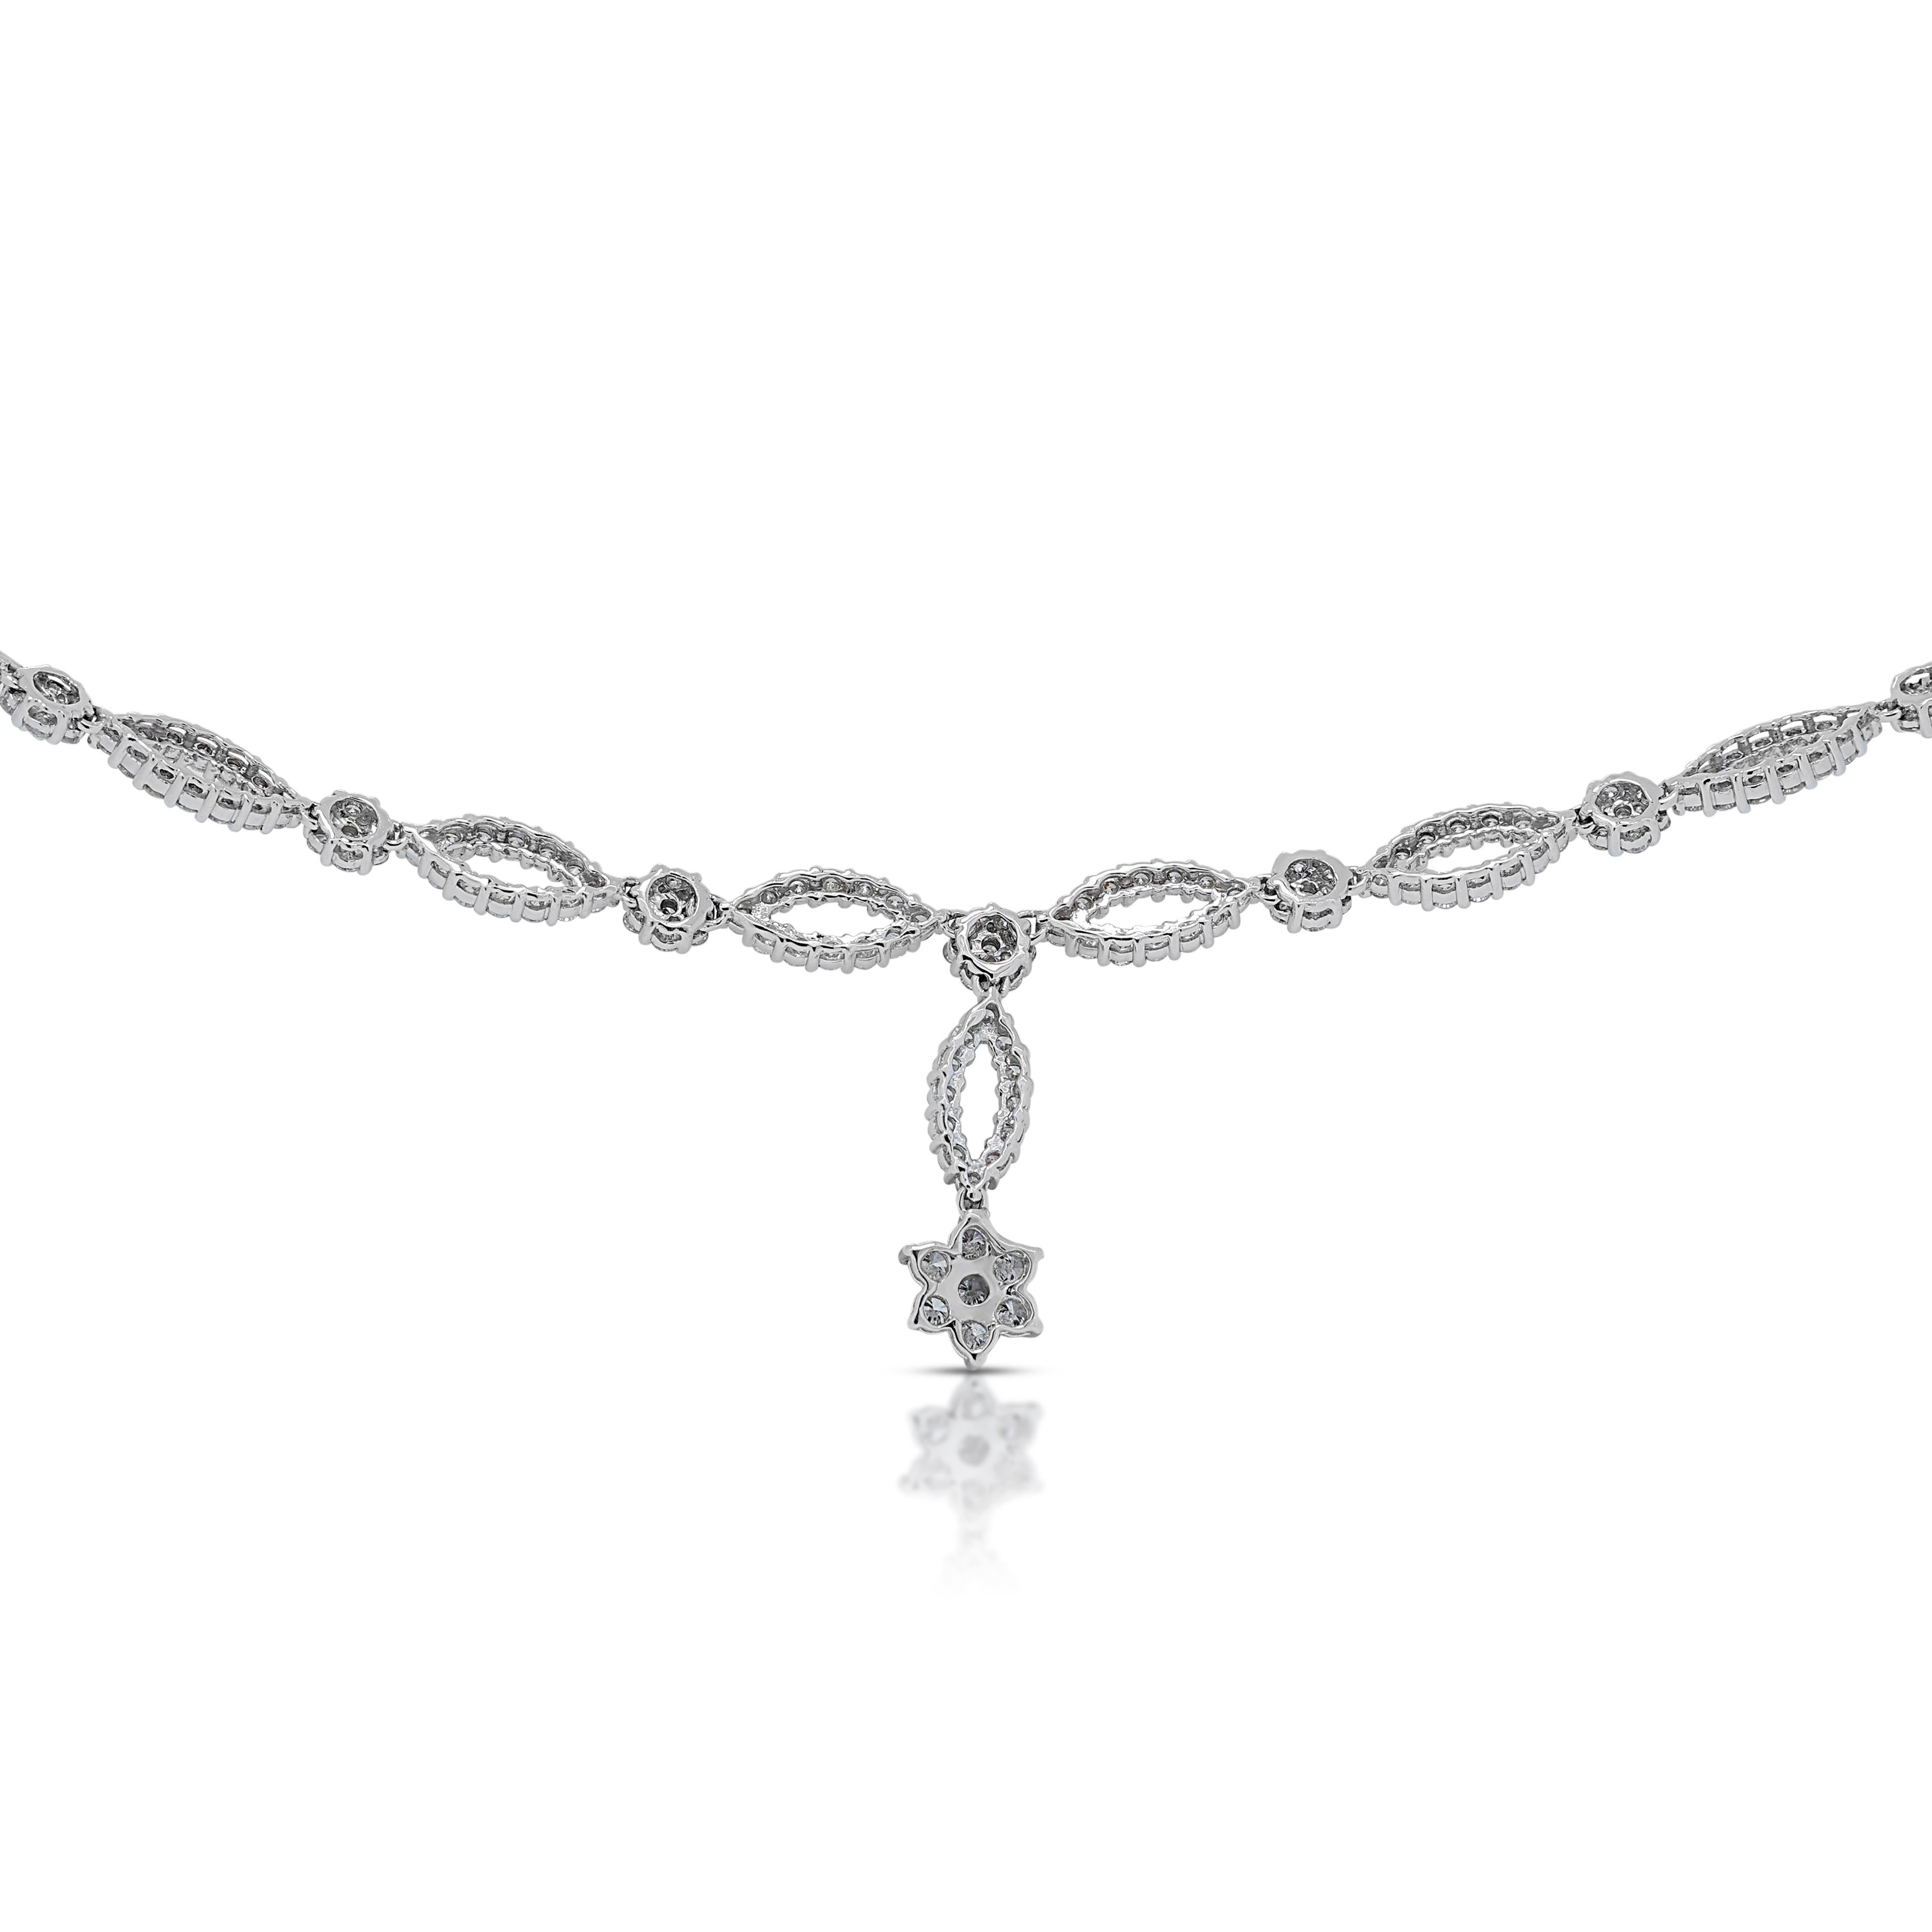 Fascinating 1.815ct Diamonds Necklace in 18K White Gold For Sale 1